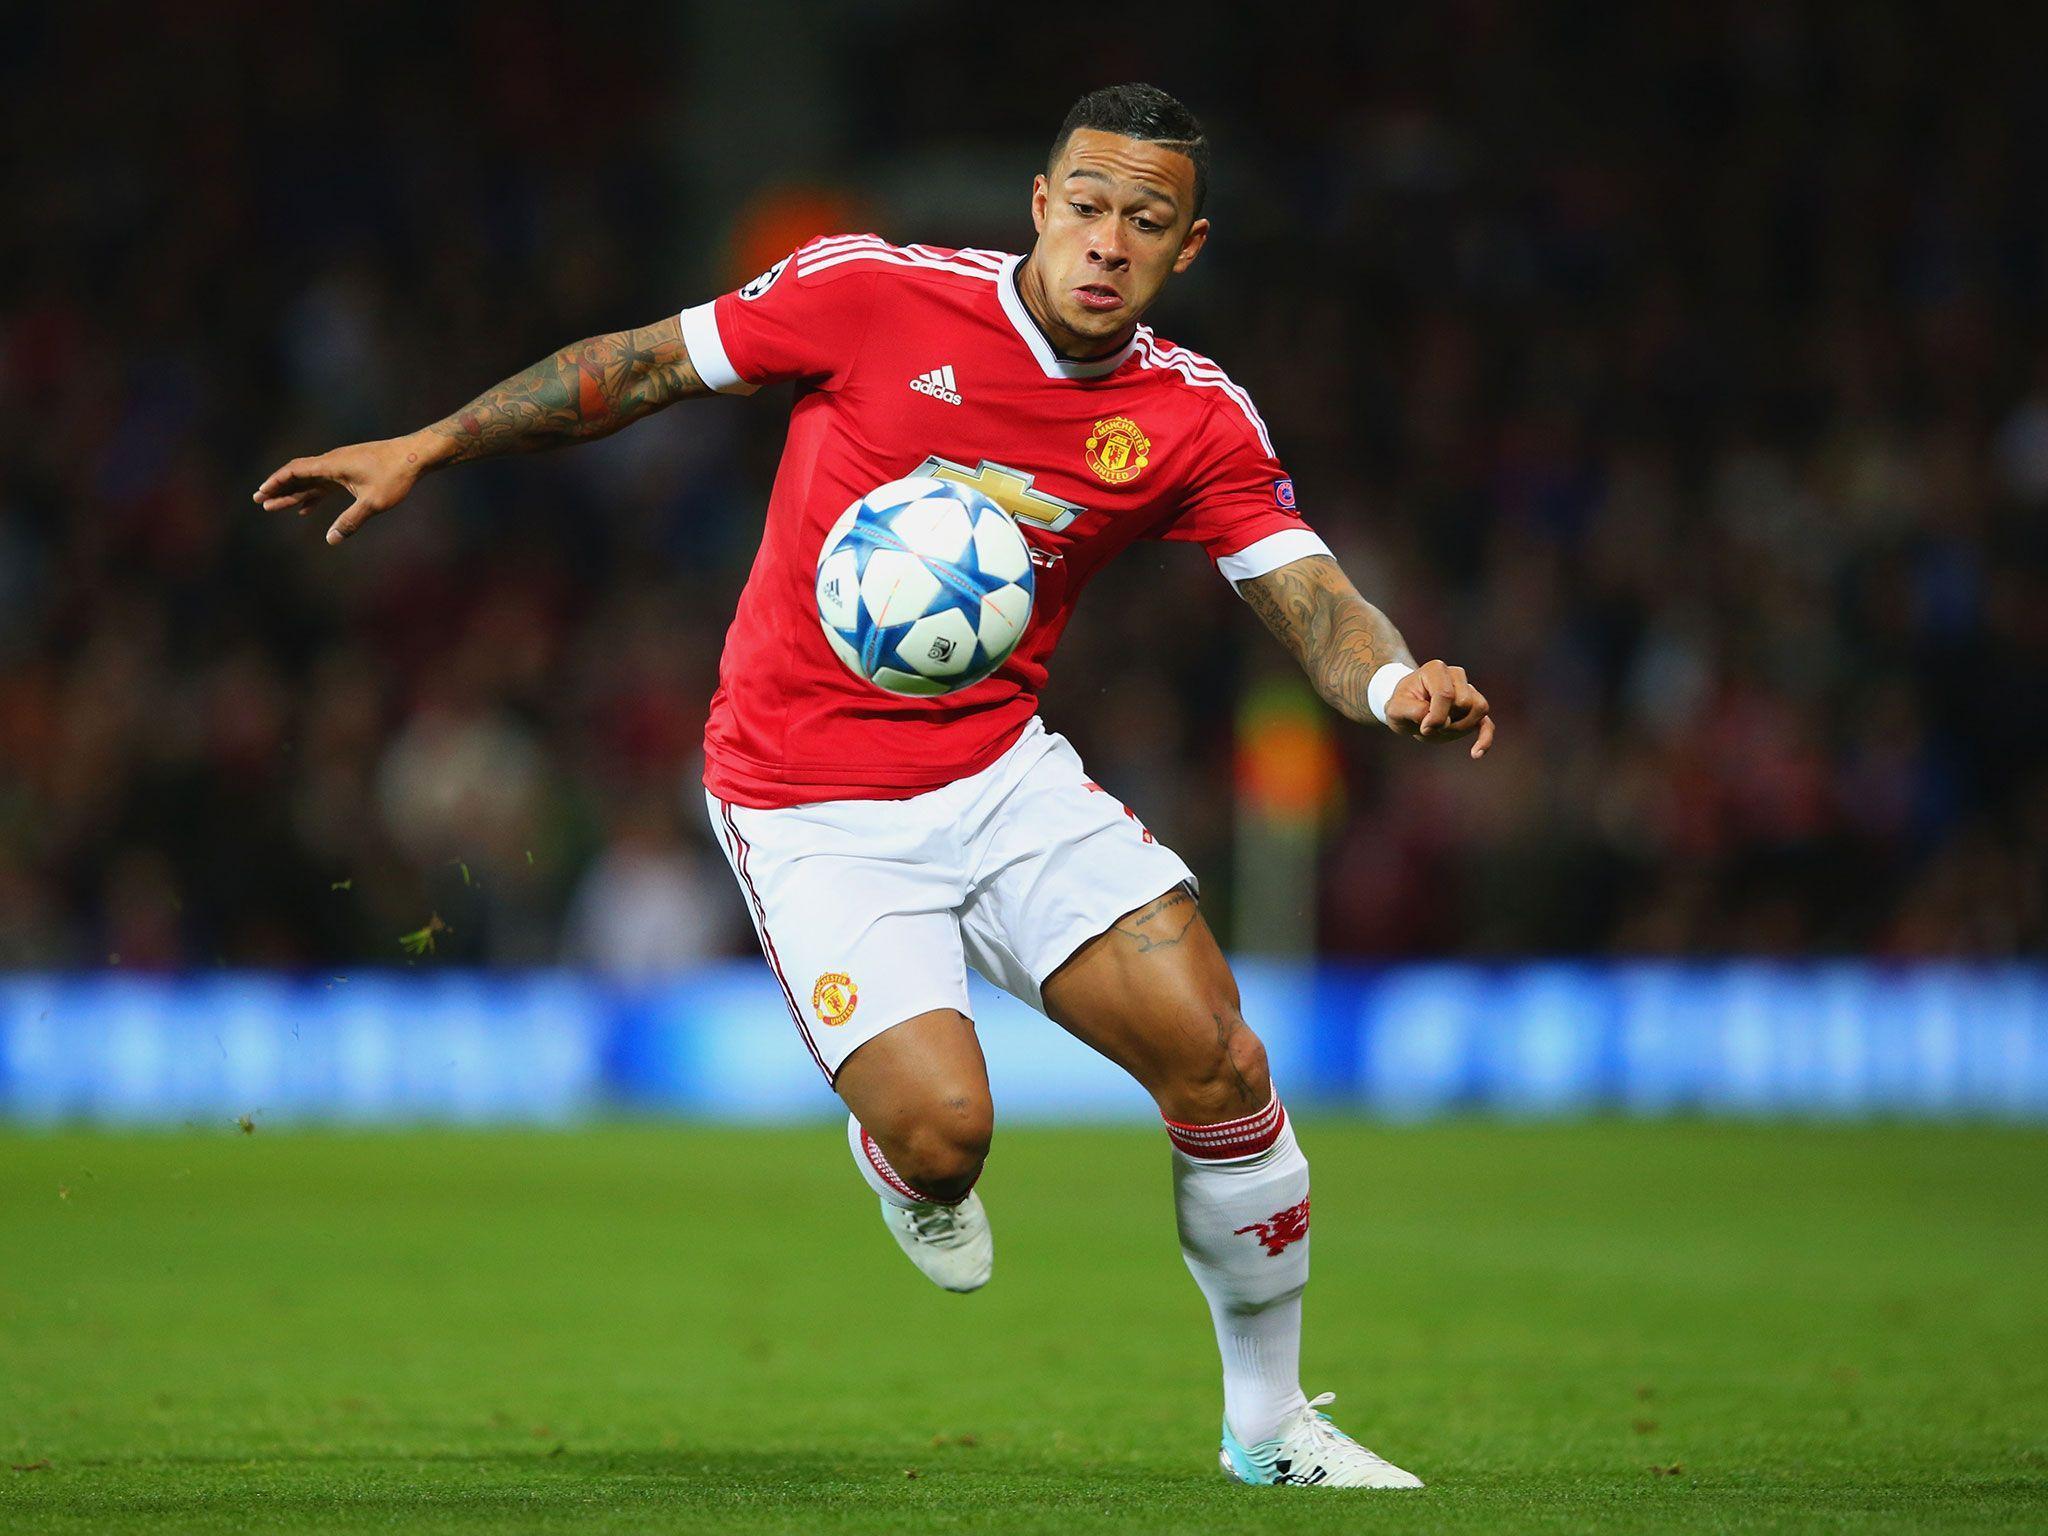 Watford vs Manchester United team news: Memphis Depay leads attack